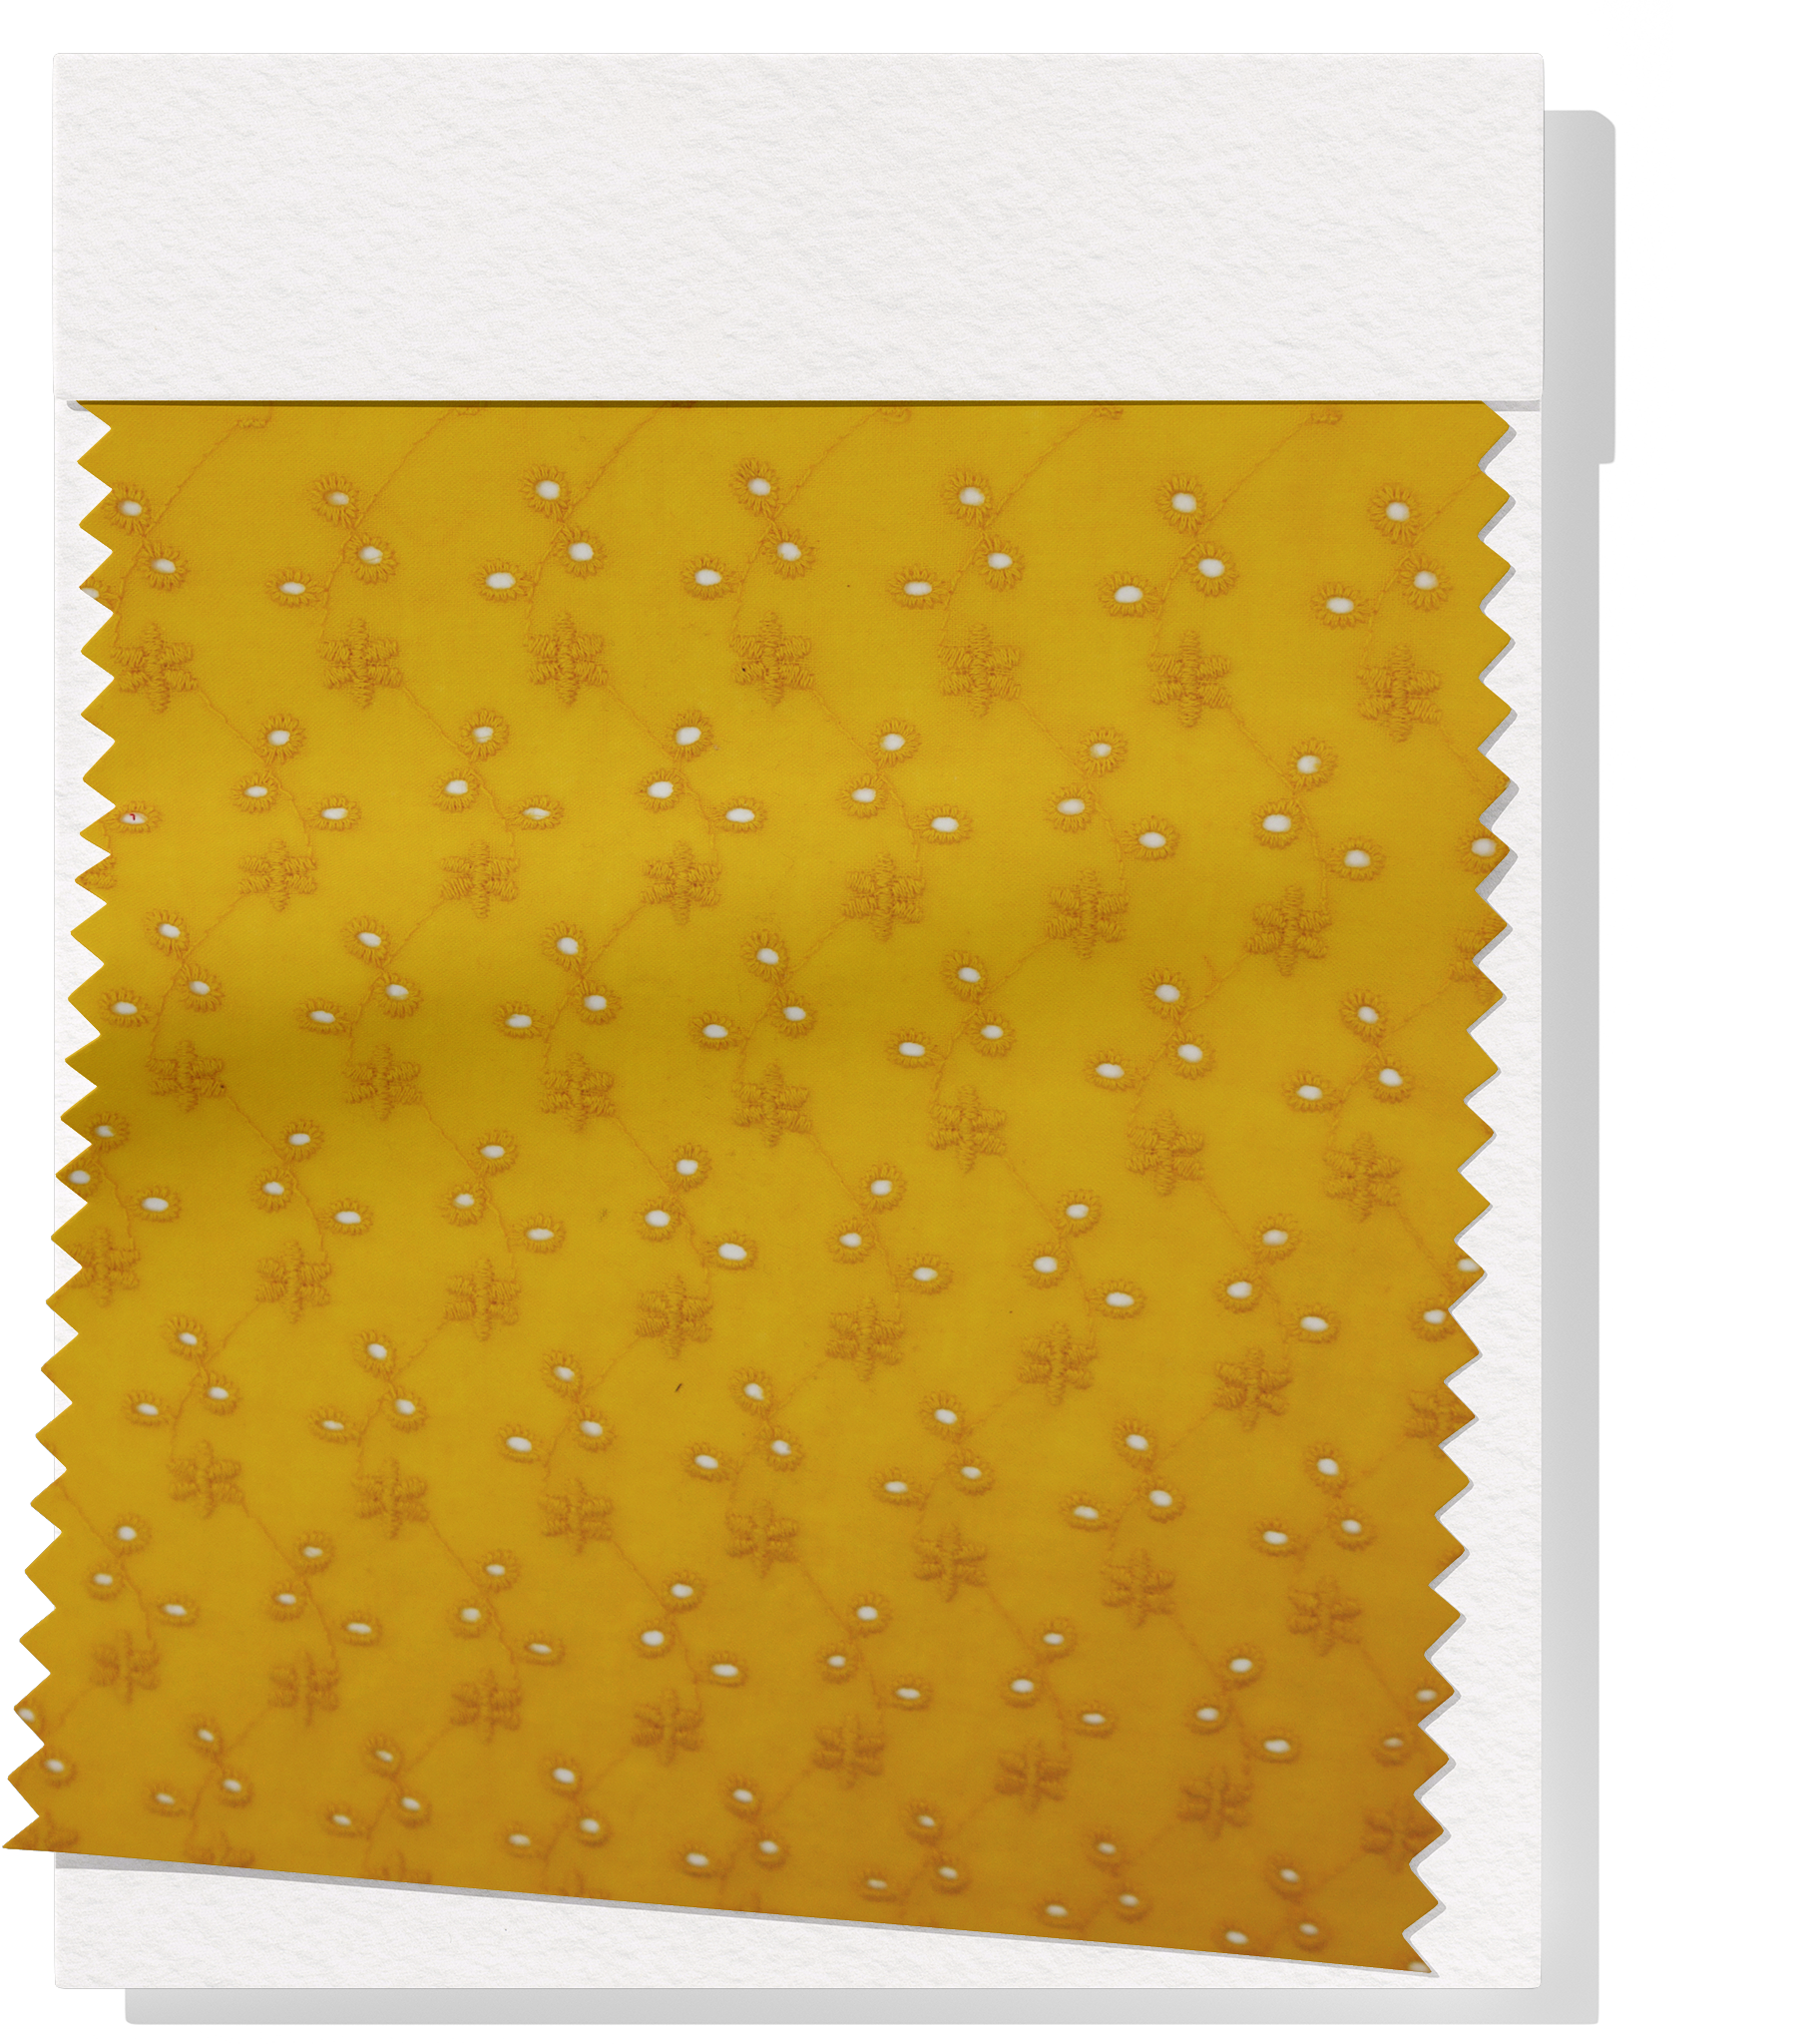 Broderie Anglaise $18.00p/m - Mustard